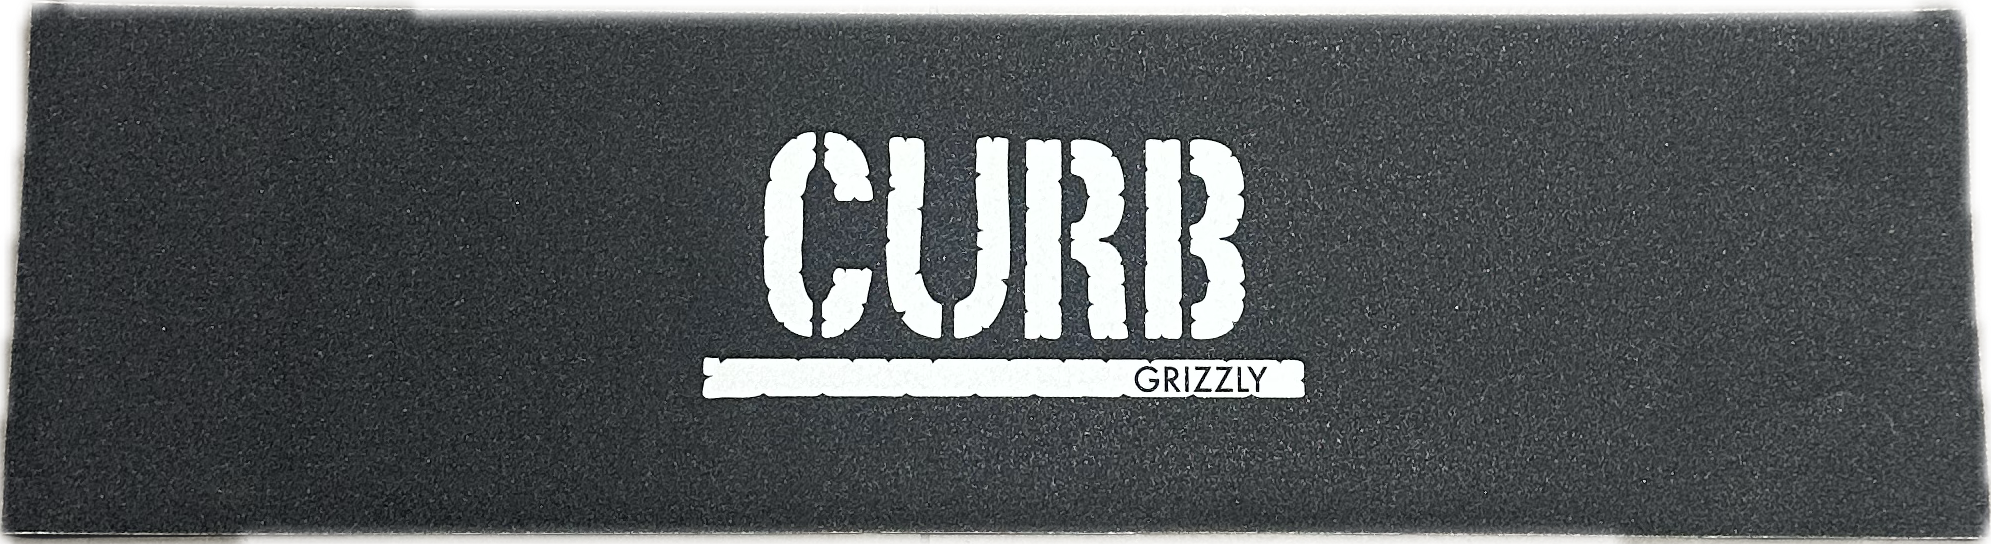 Grizzly x Curb Stamp Griptape